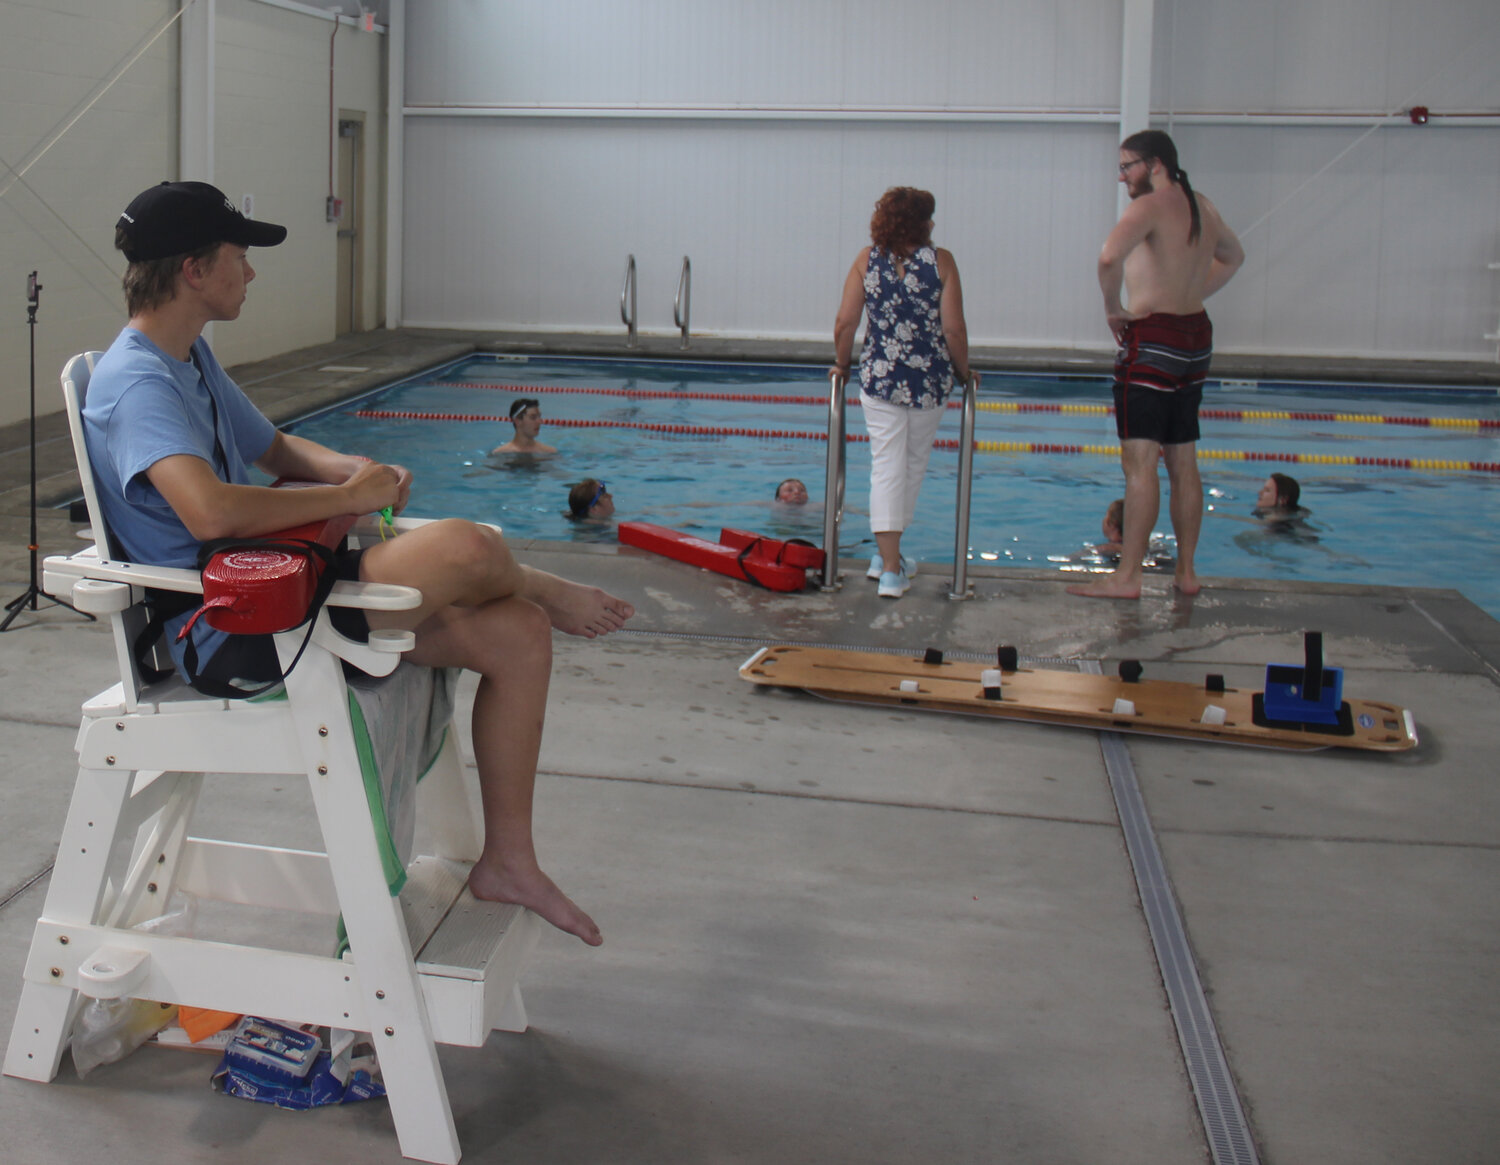 Lifeguard Nathanial Kutsch watches as Lisa Kramer and Cole McBride talk to the five lifeguard candidates on May 19.